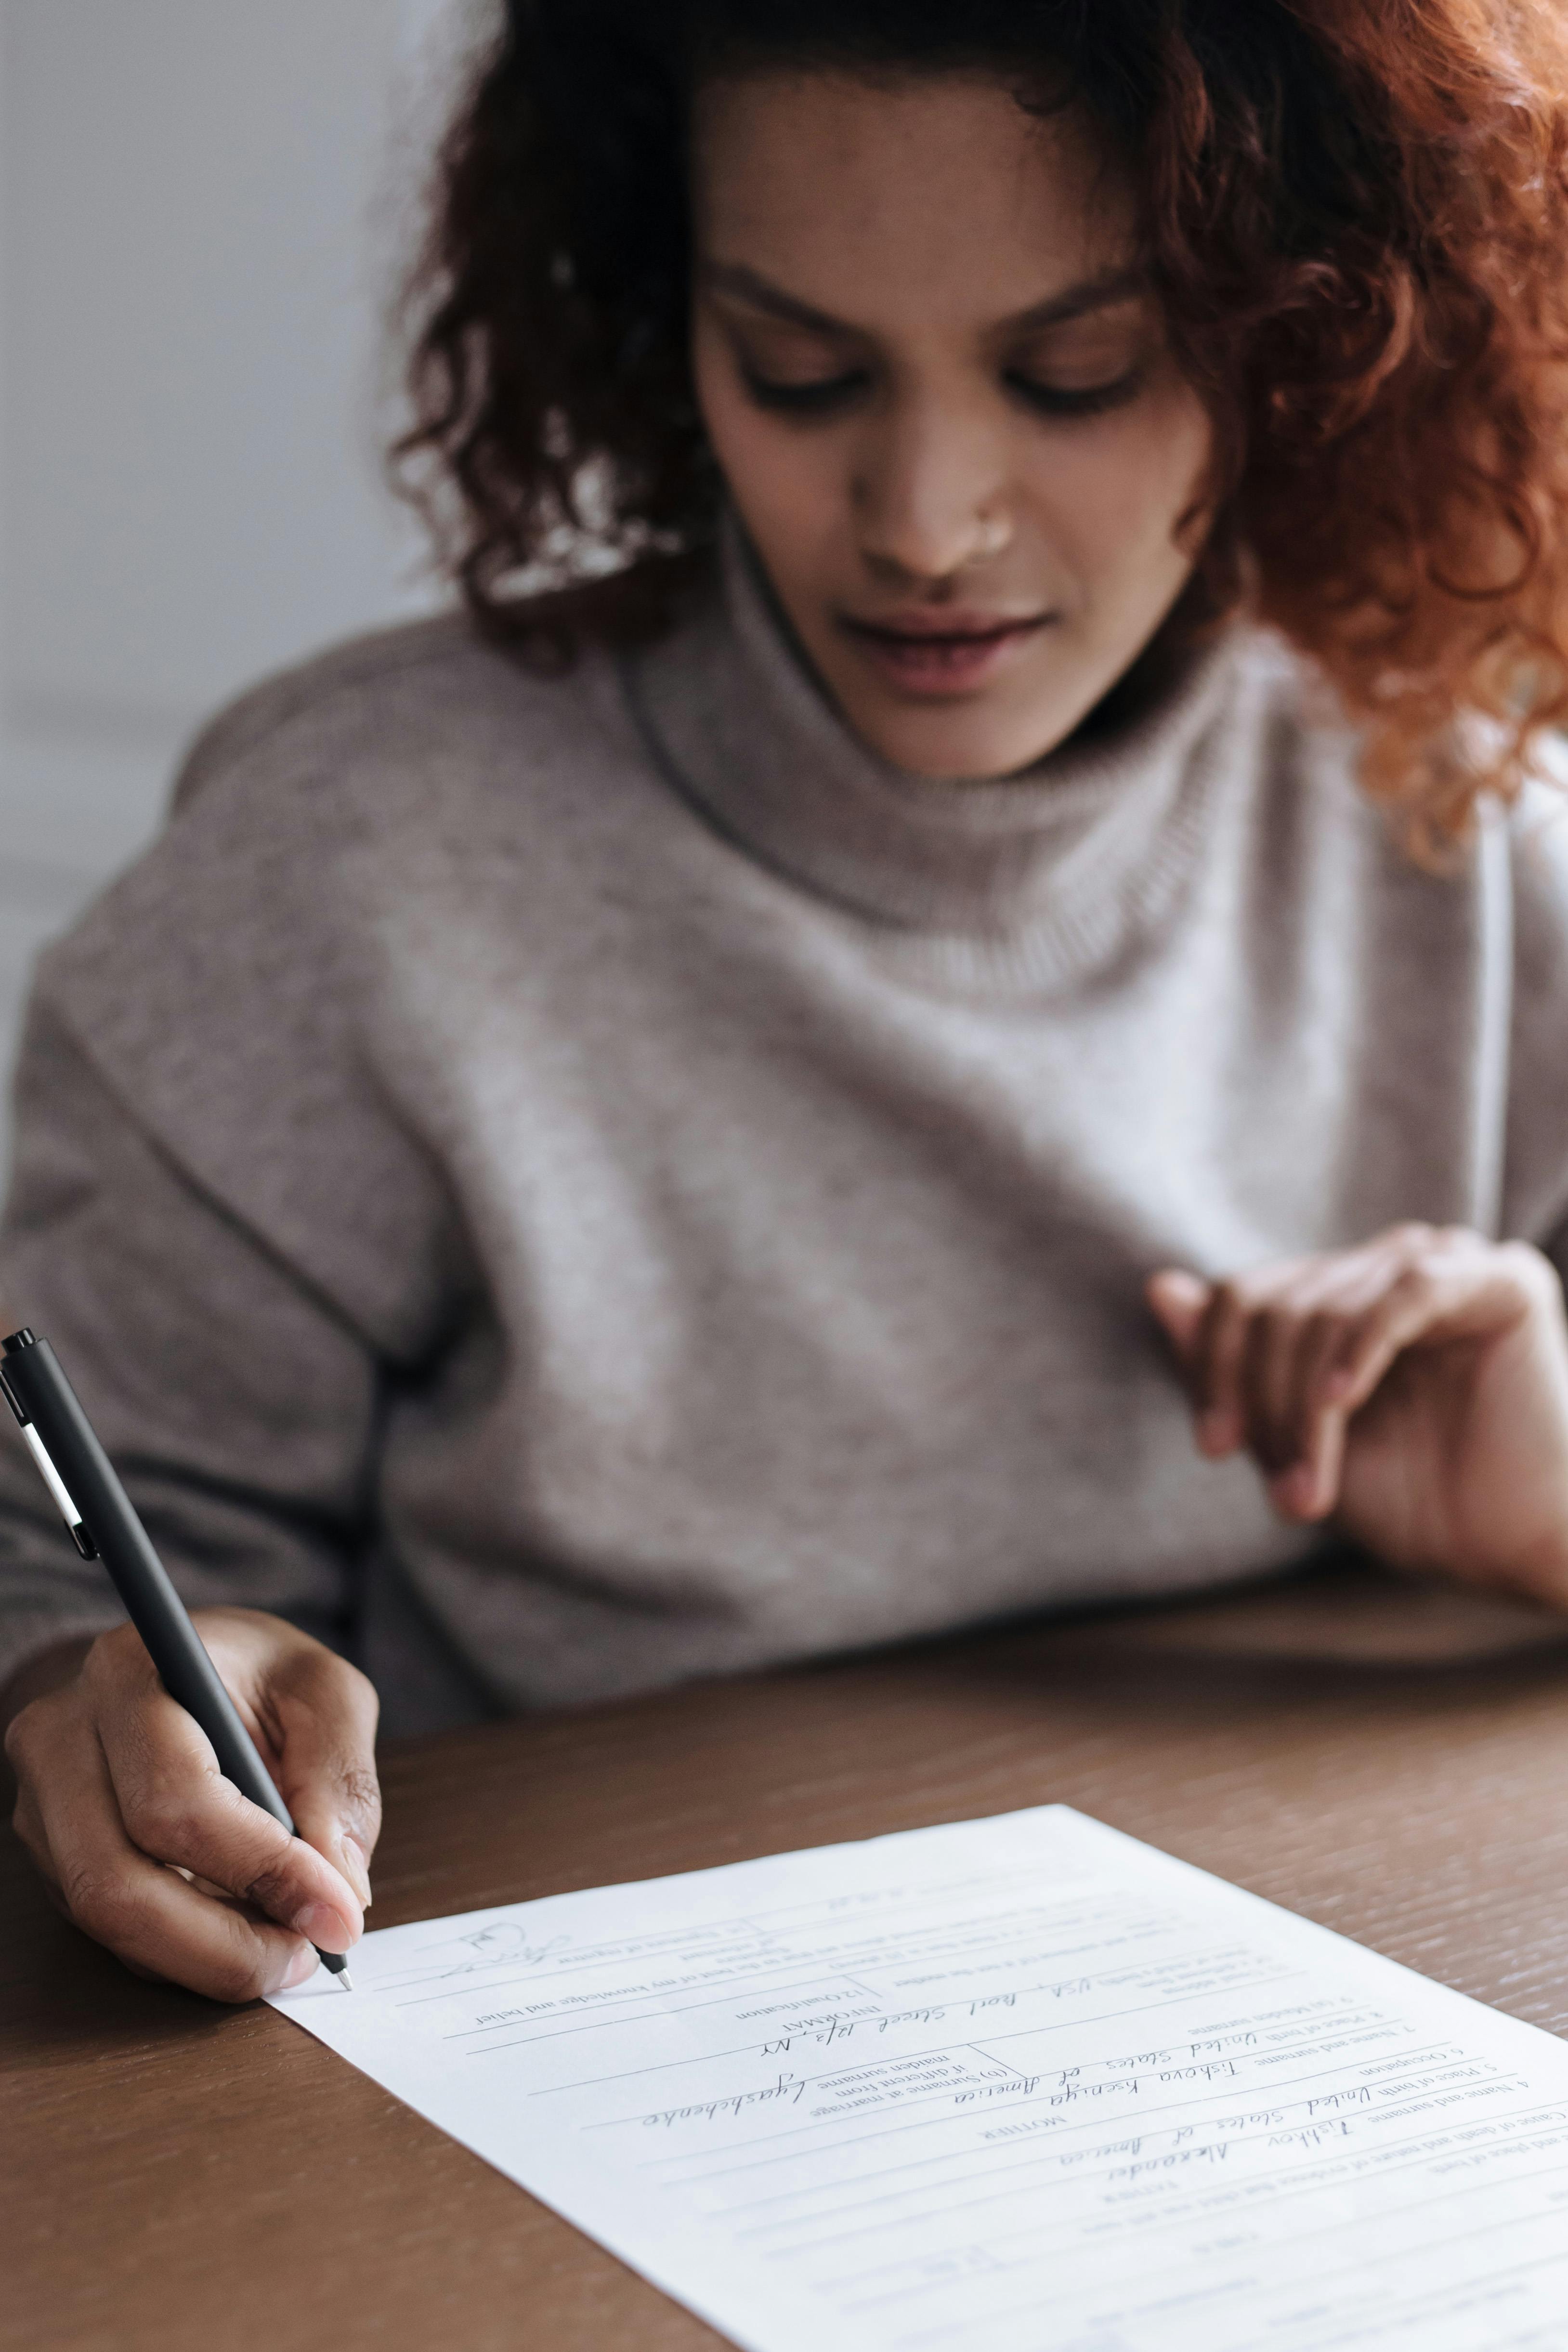 A woman signing documents | Source: Pexels